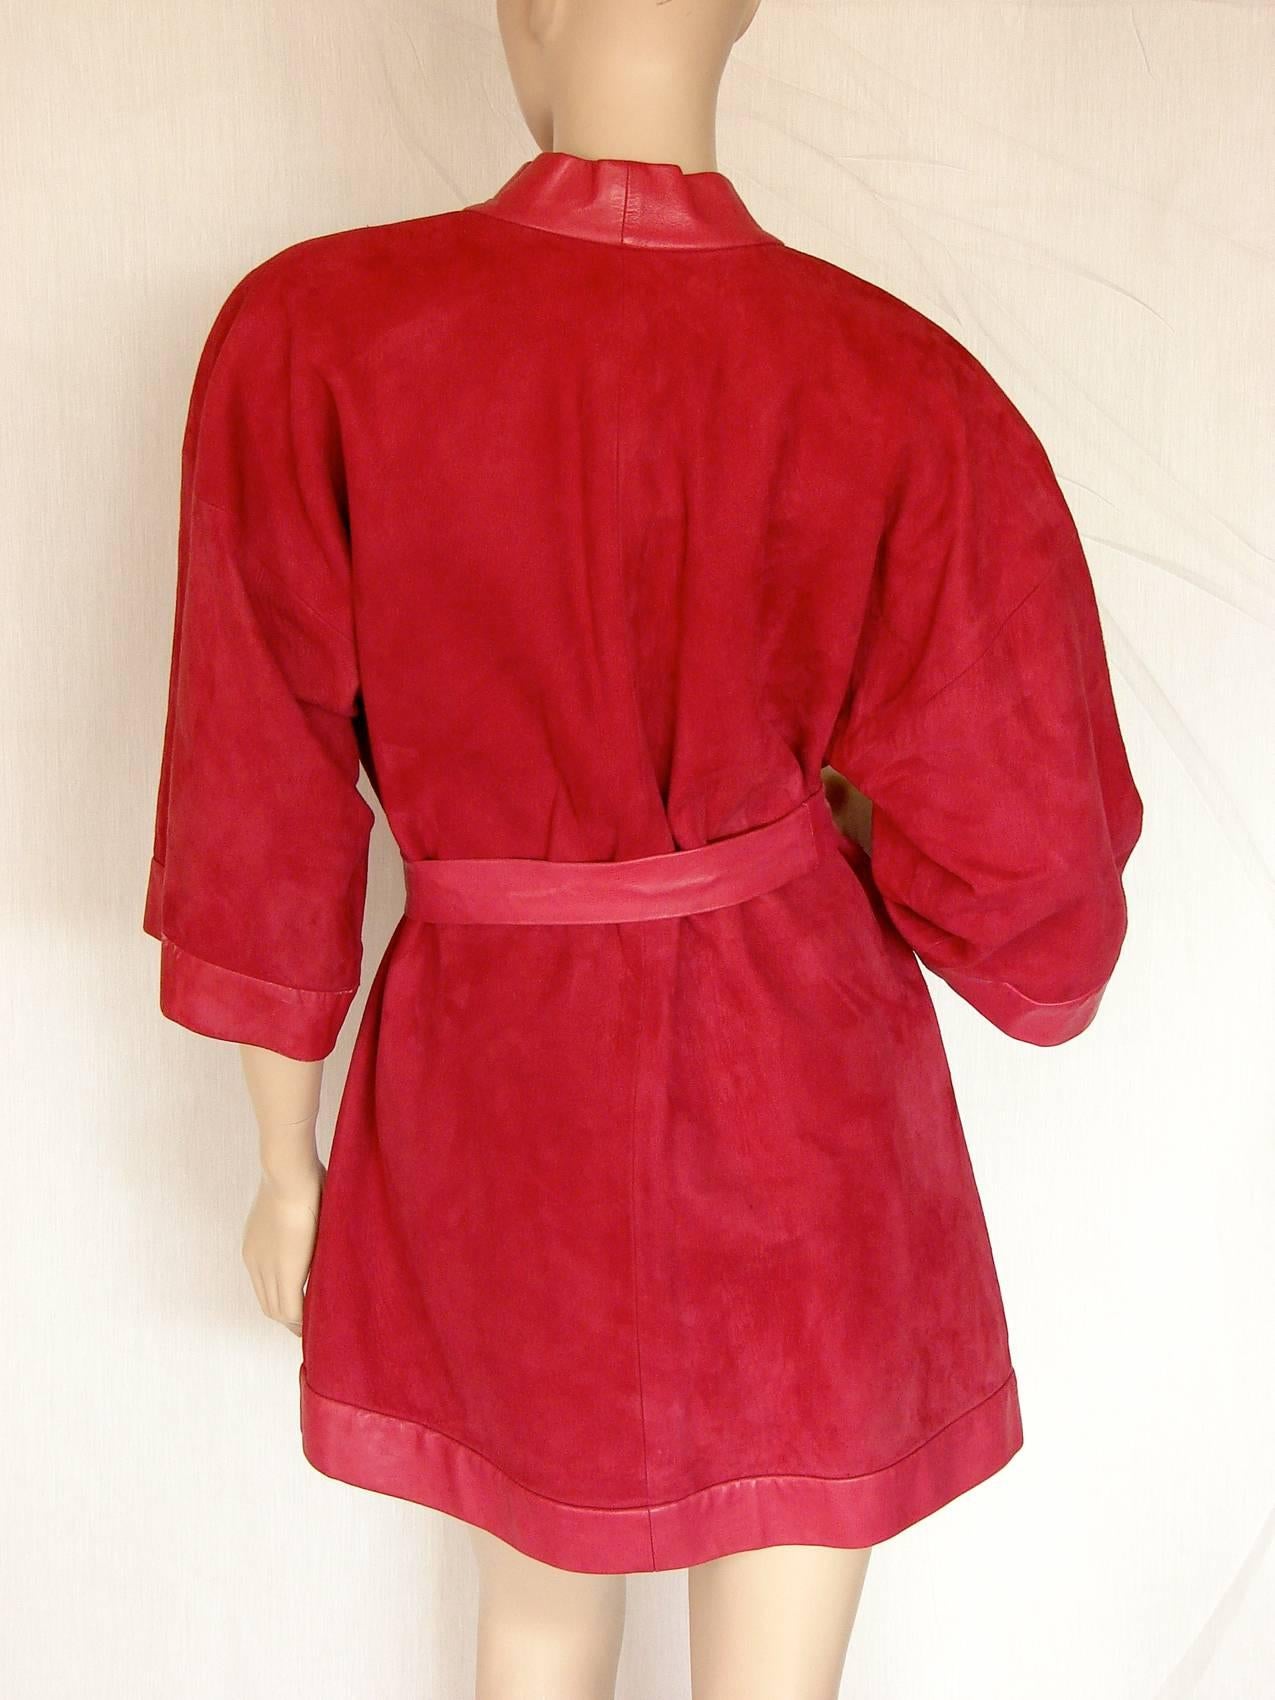 Bonnie Cashin Cherry Red Suede Kimono with Leather Trim and Belt, 1960s 1